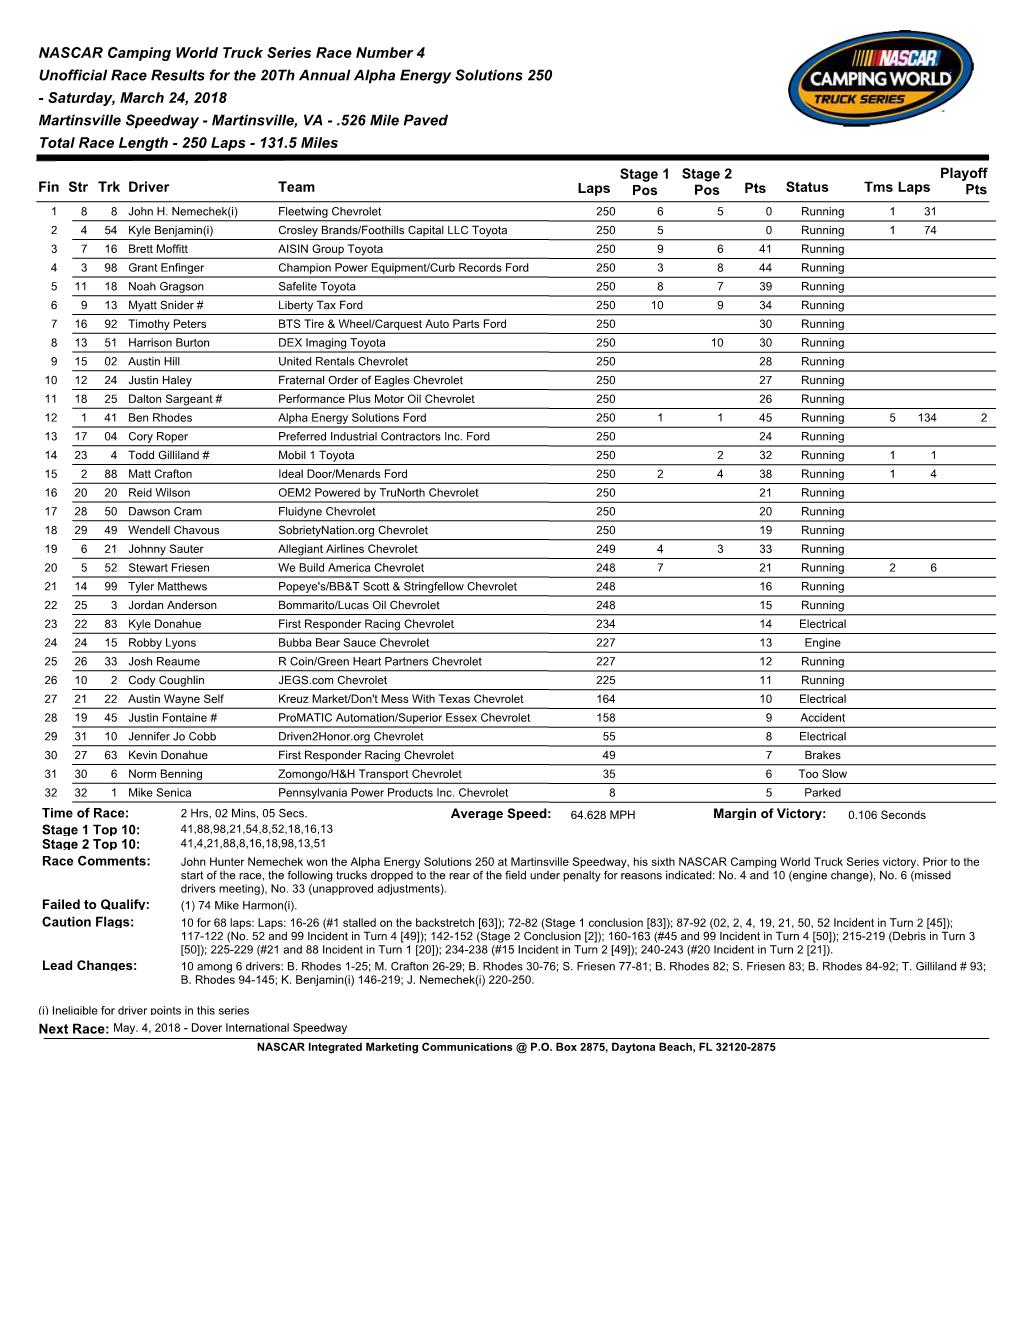 Martinsville Race Results Page